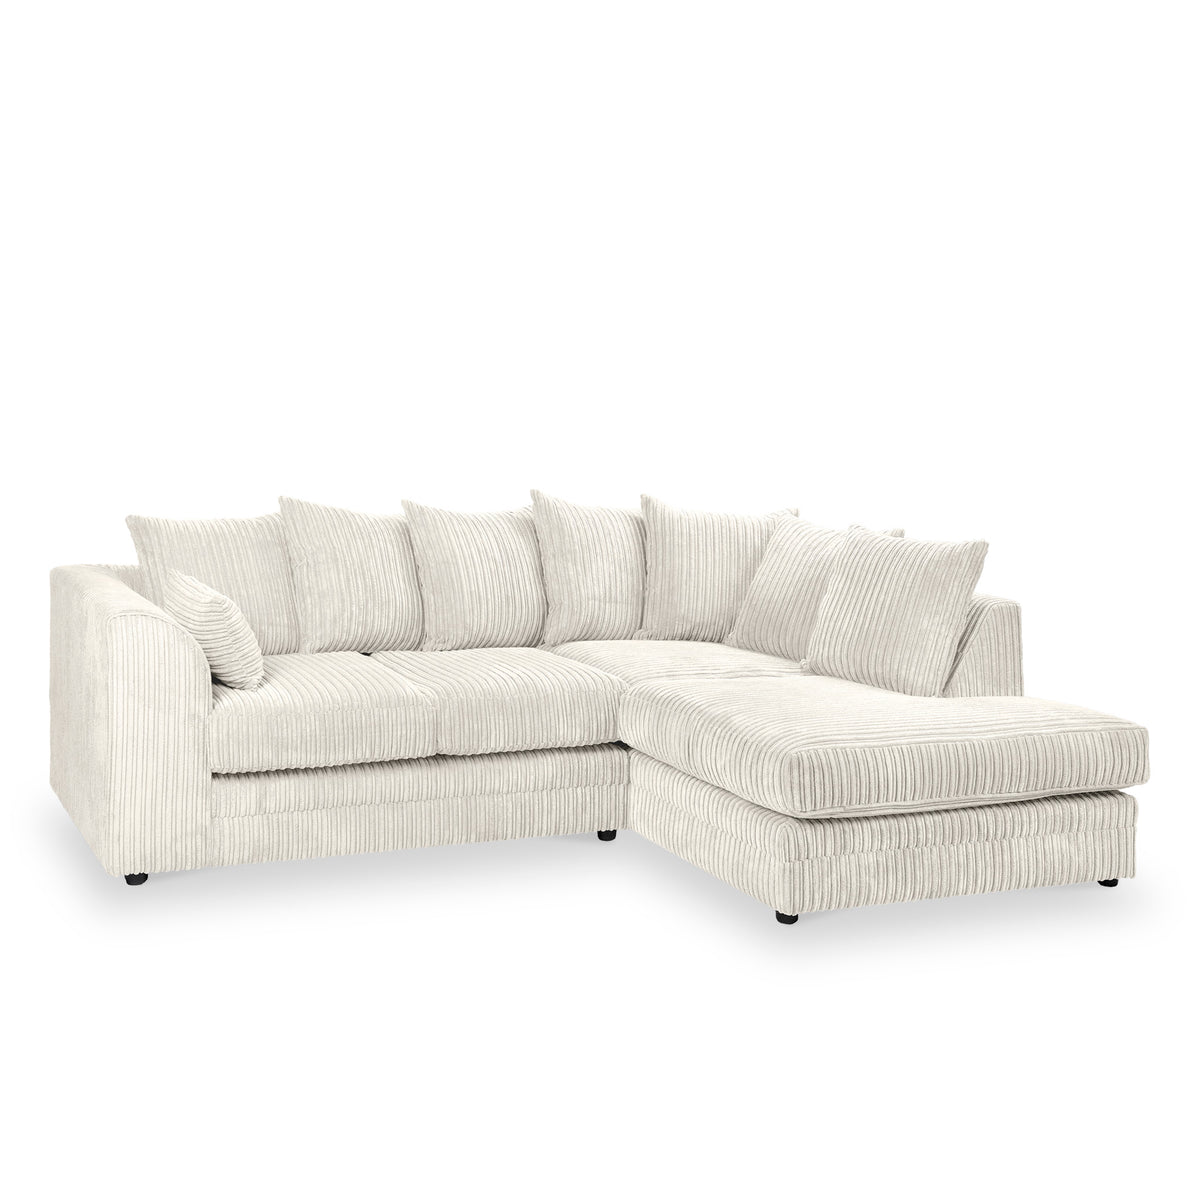 Bletchley Cream Right Hand Jumbo Cord Chaise Couch from Roseland Furniture